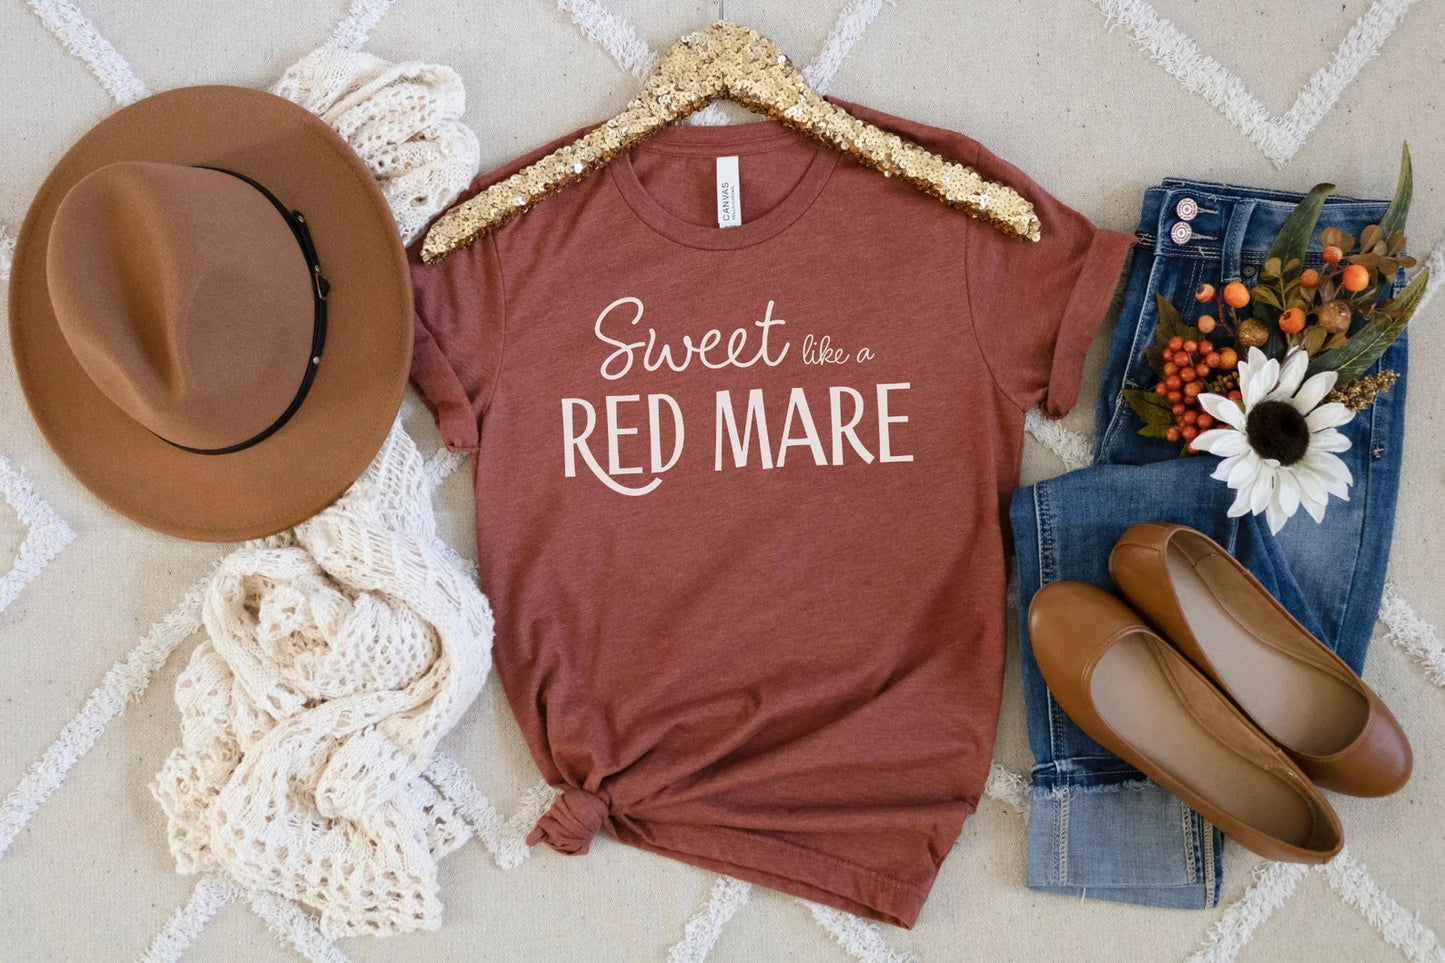 Sweet Like a Red Mare, Equestrian Shirt